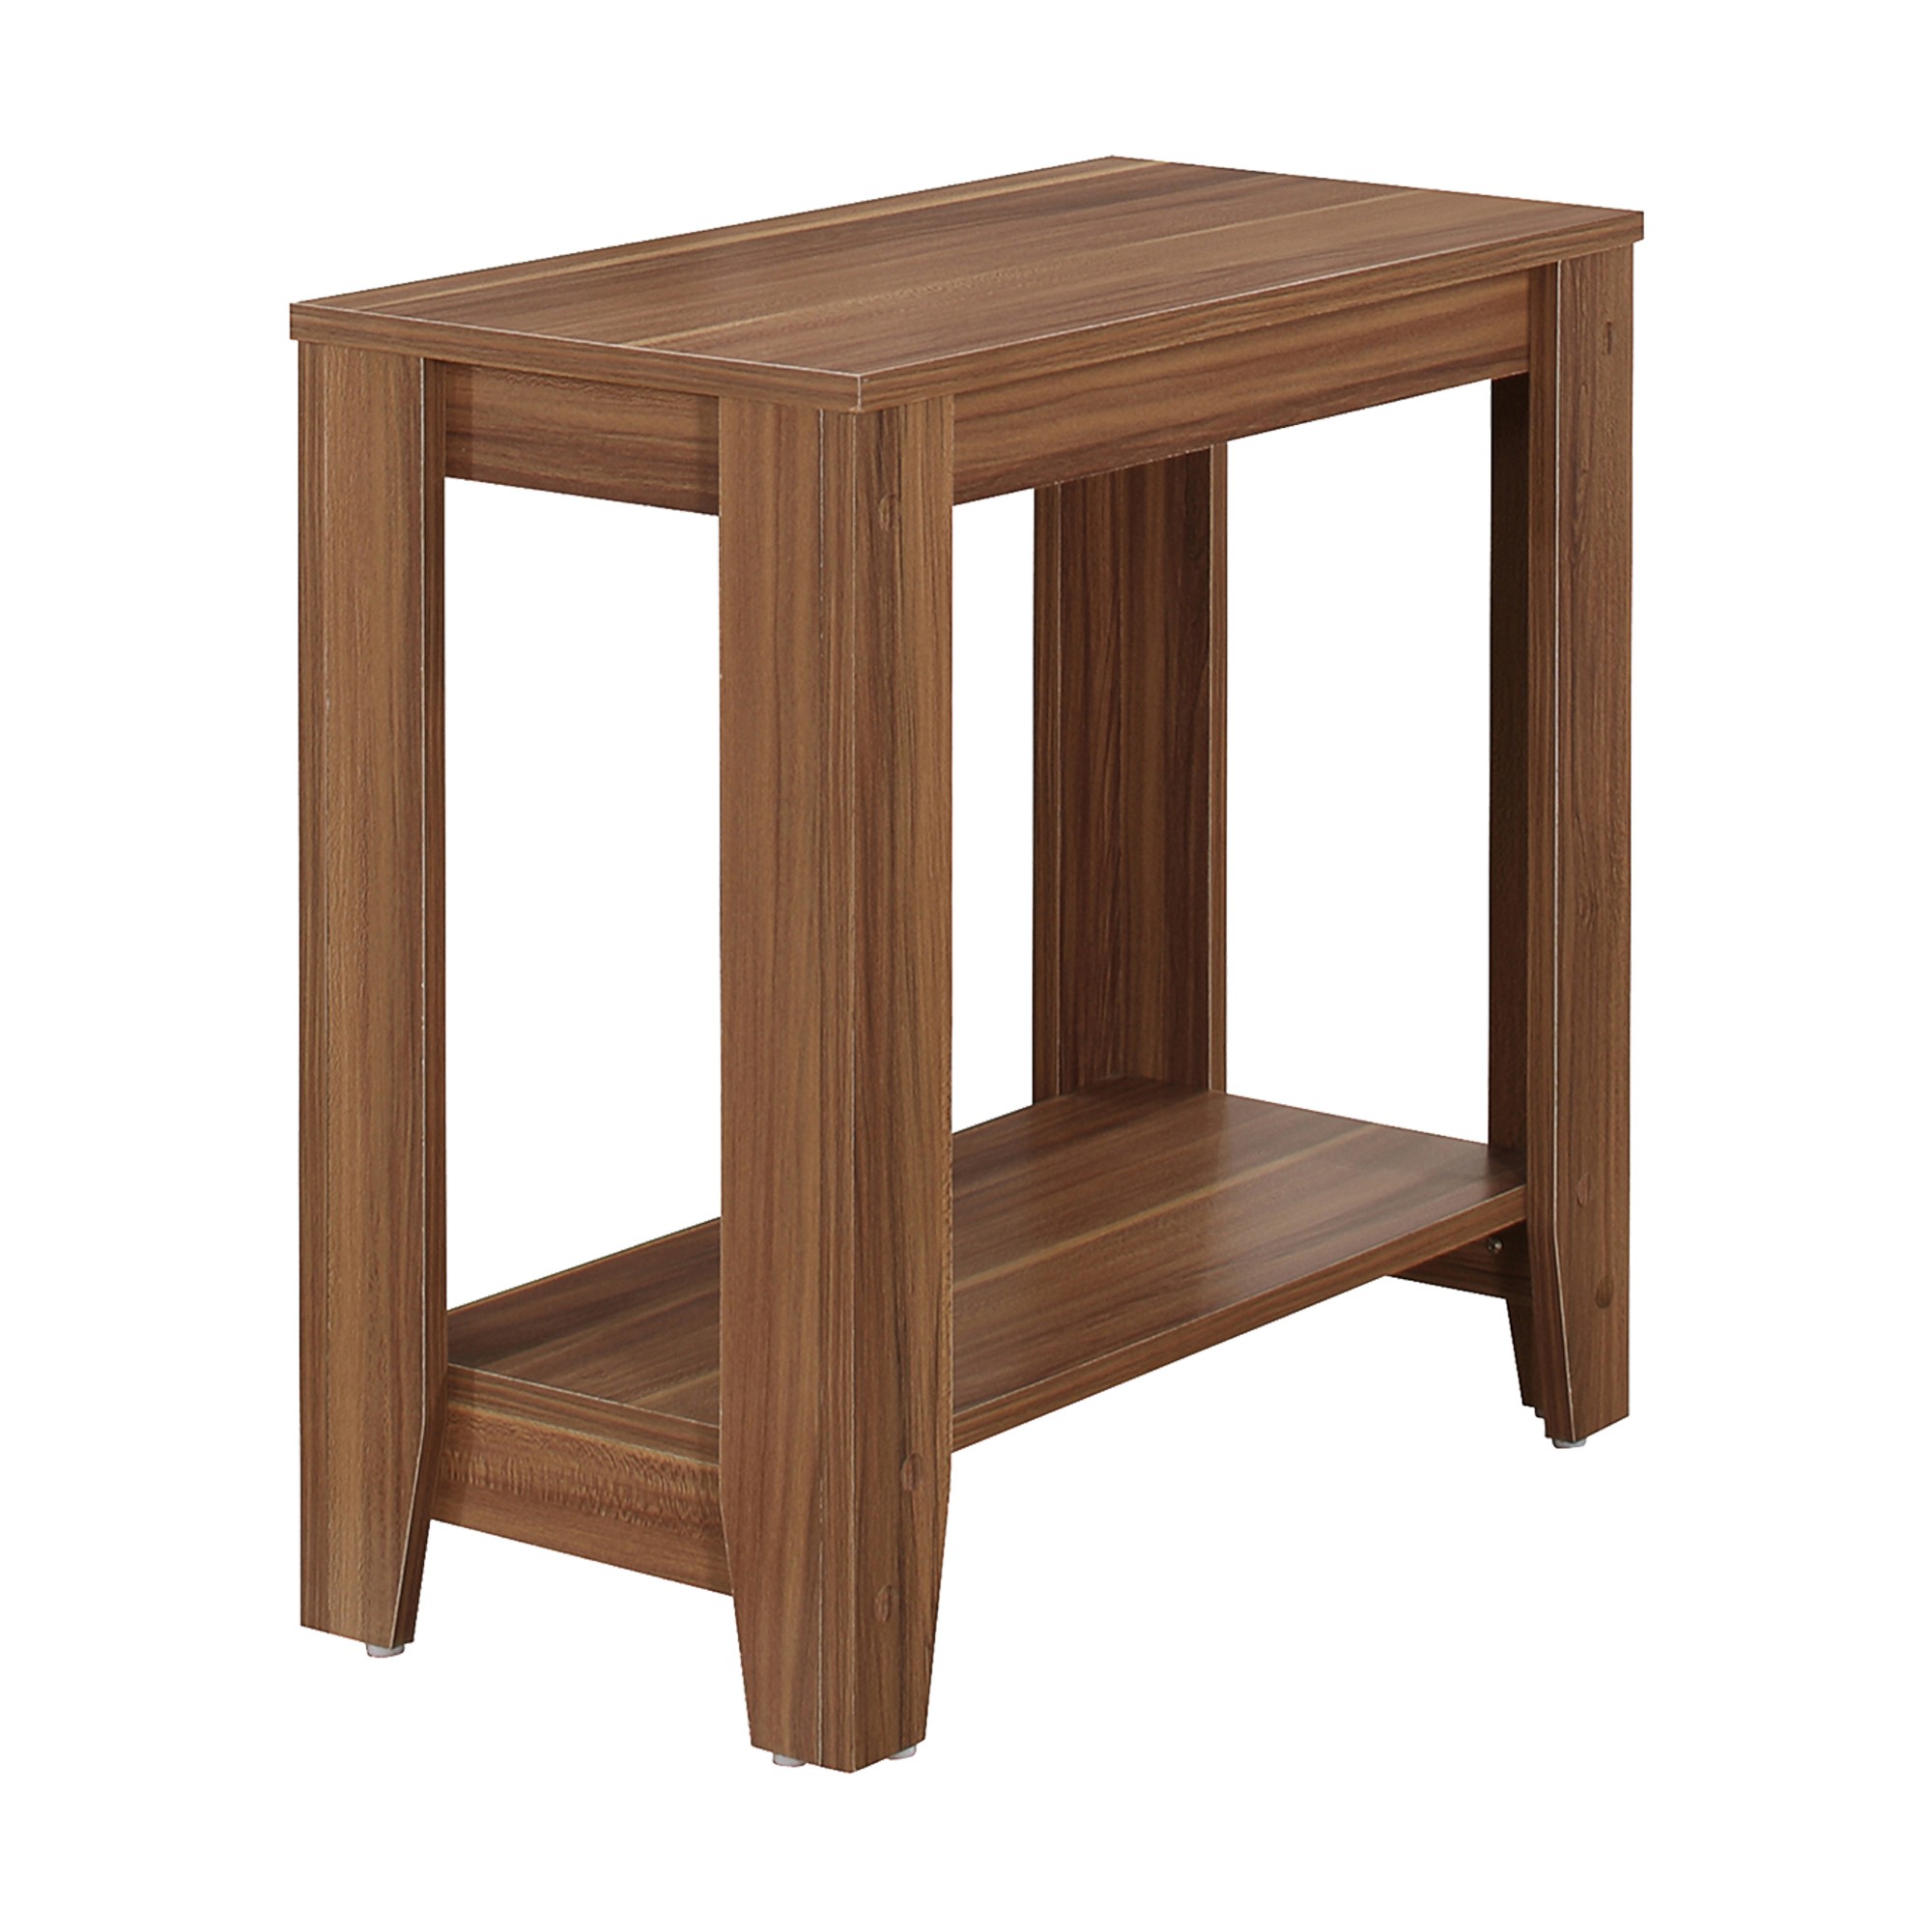 11.75" x 23.75" x 22" Walnut Particle Board Laminate Accent Table